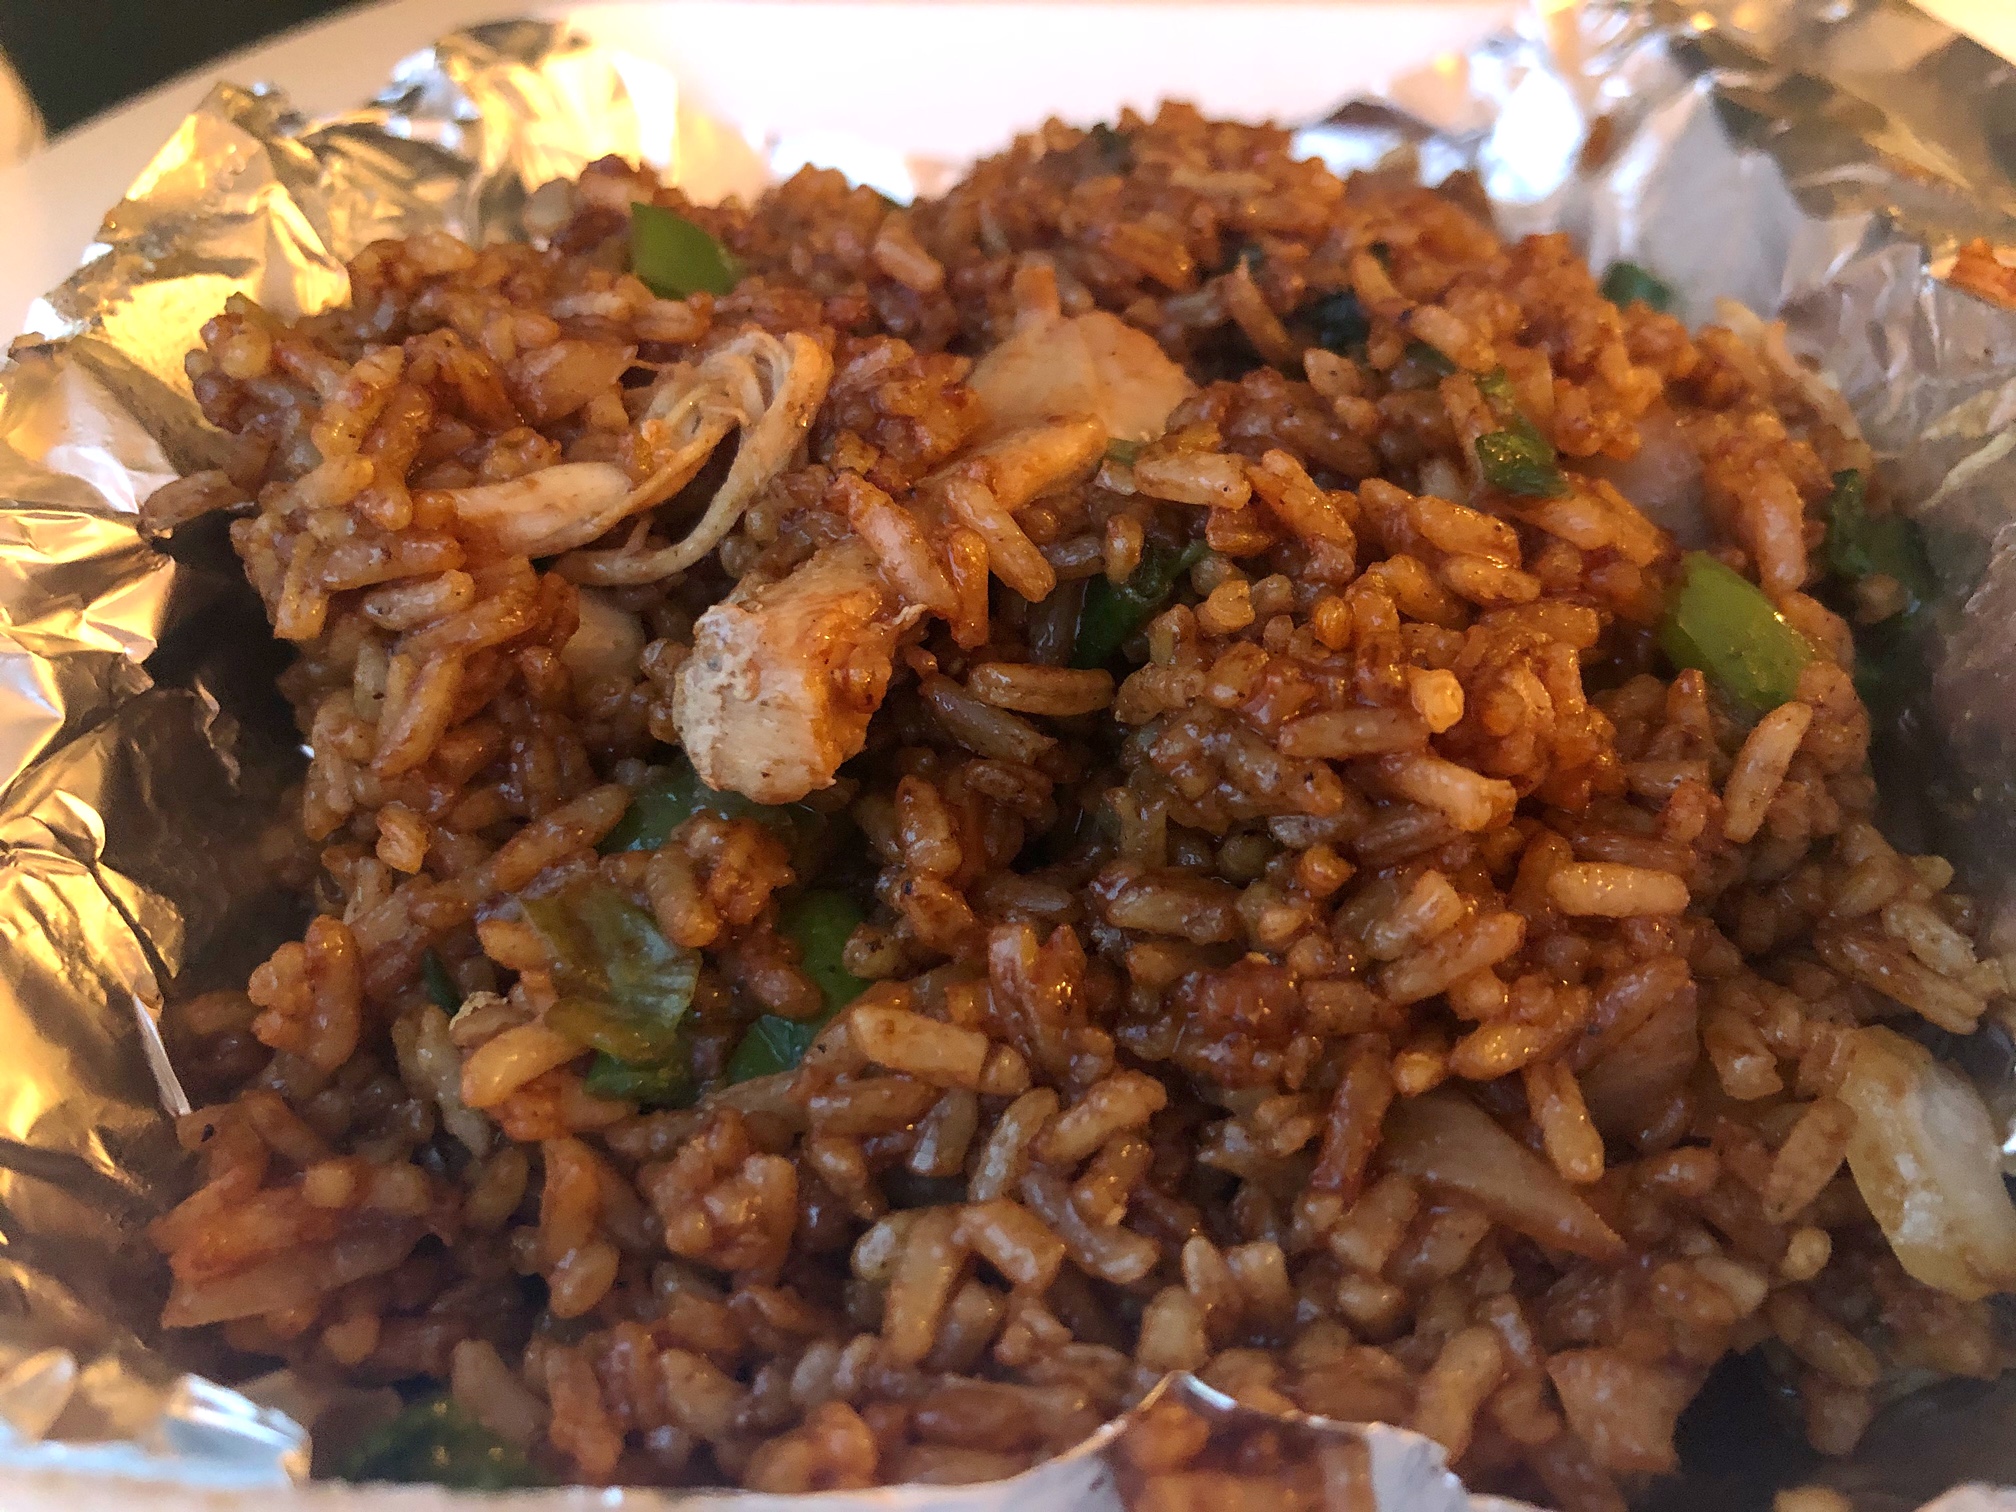 Fried rice from Elnora's Catering & Cafe features dark brown rice with green onion, white onion, green bell pepper, and chicken slices. Photo by Alyssa Buckley.